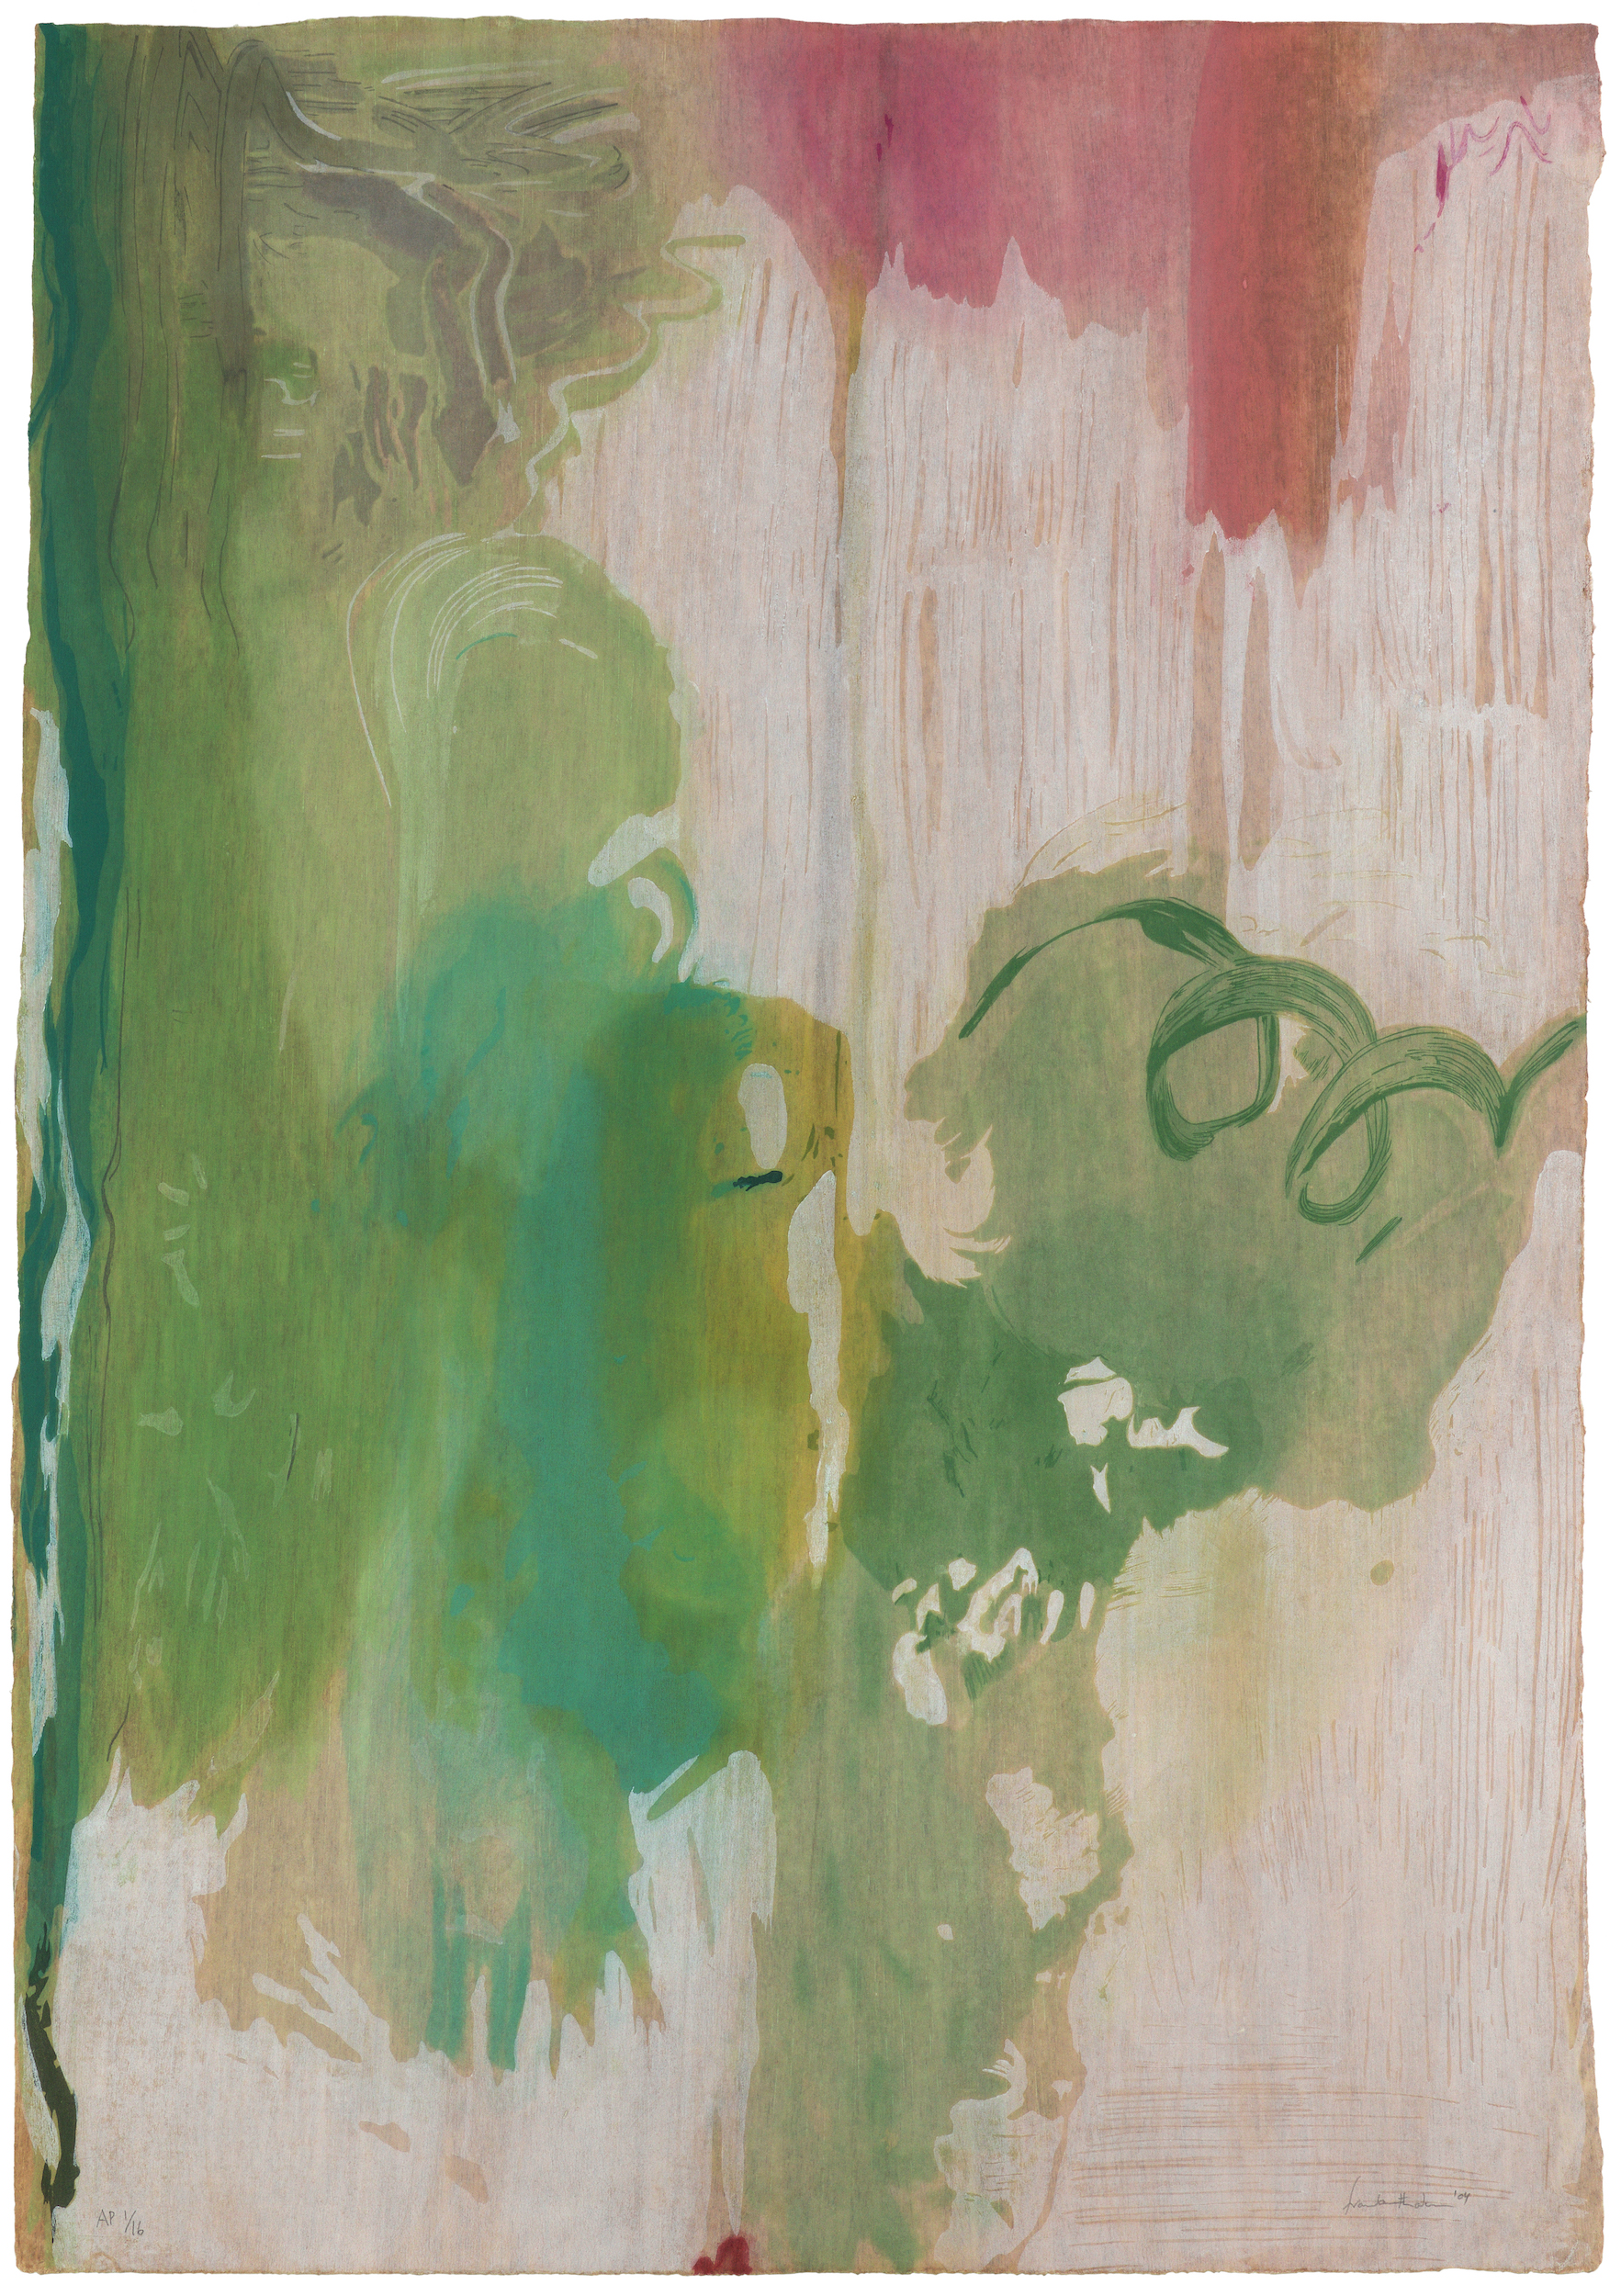 Pins des neiges by Helen Frankenthaler - 2004 - 95.3 x 66 cm Dulwich Picture Gallery